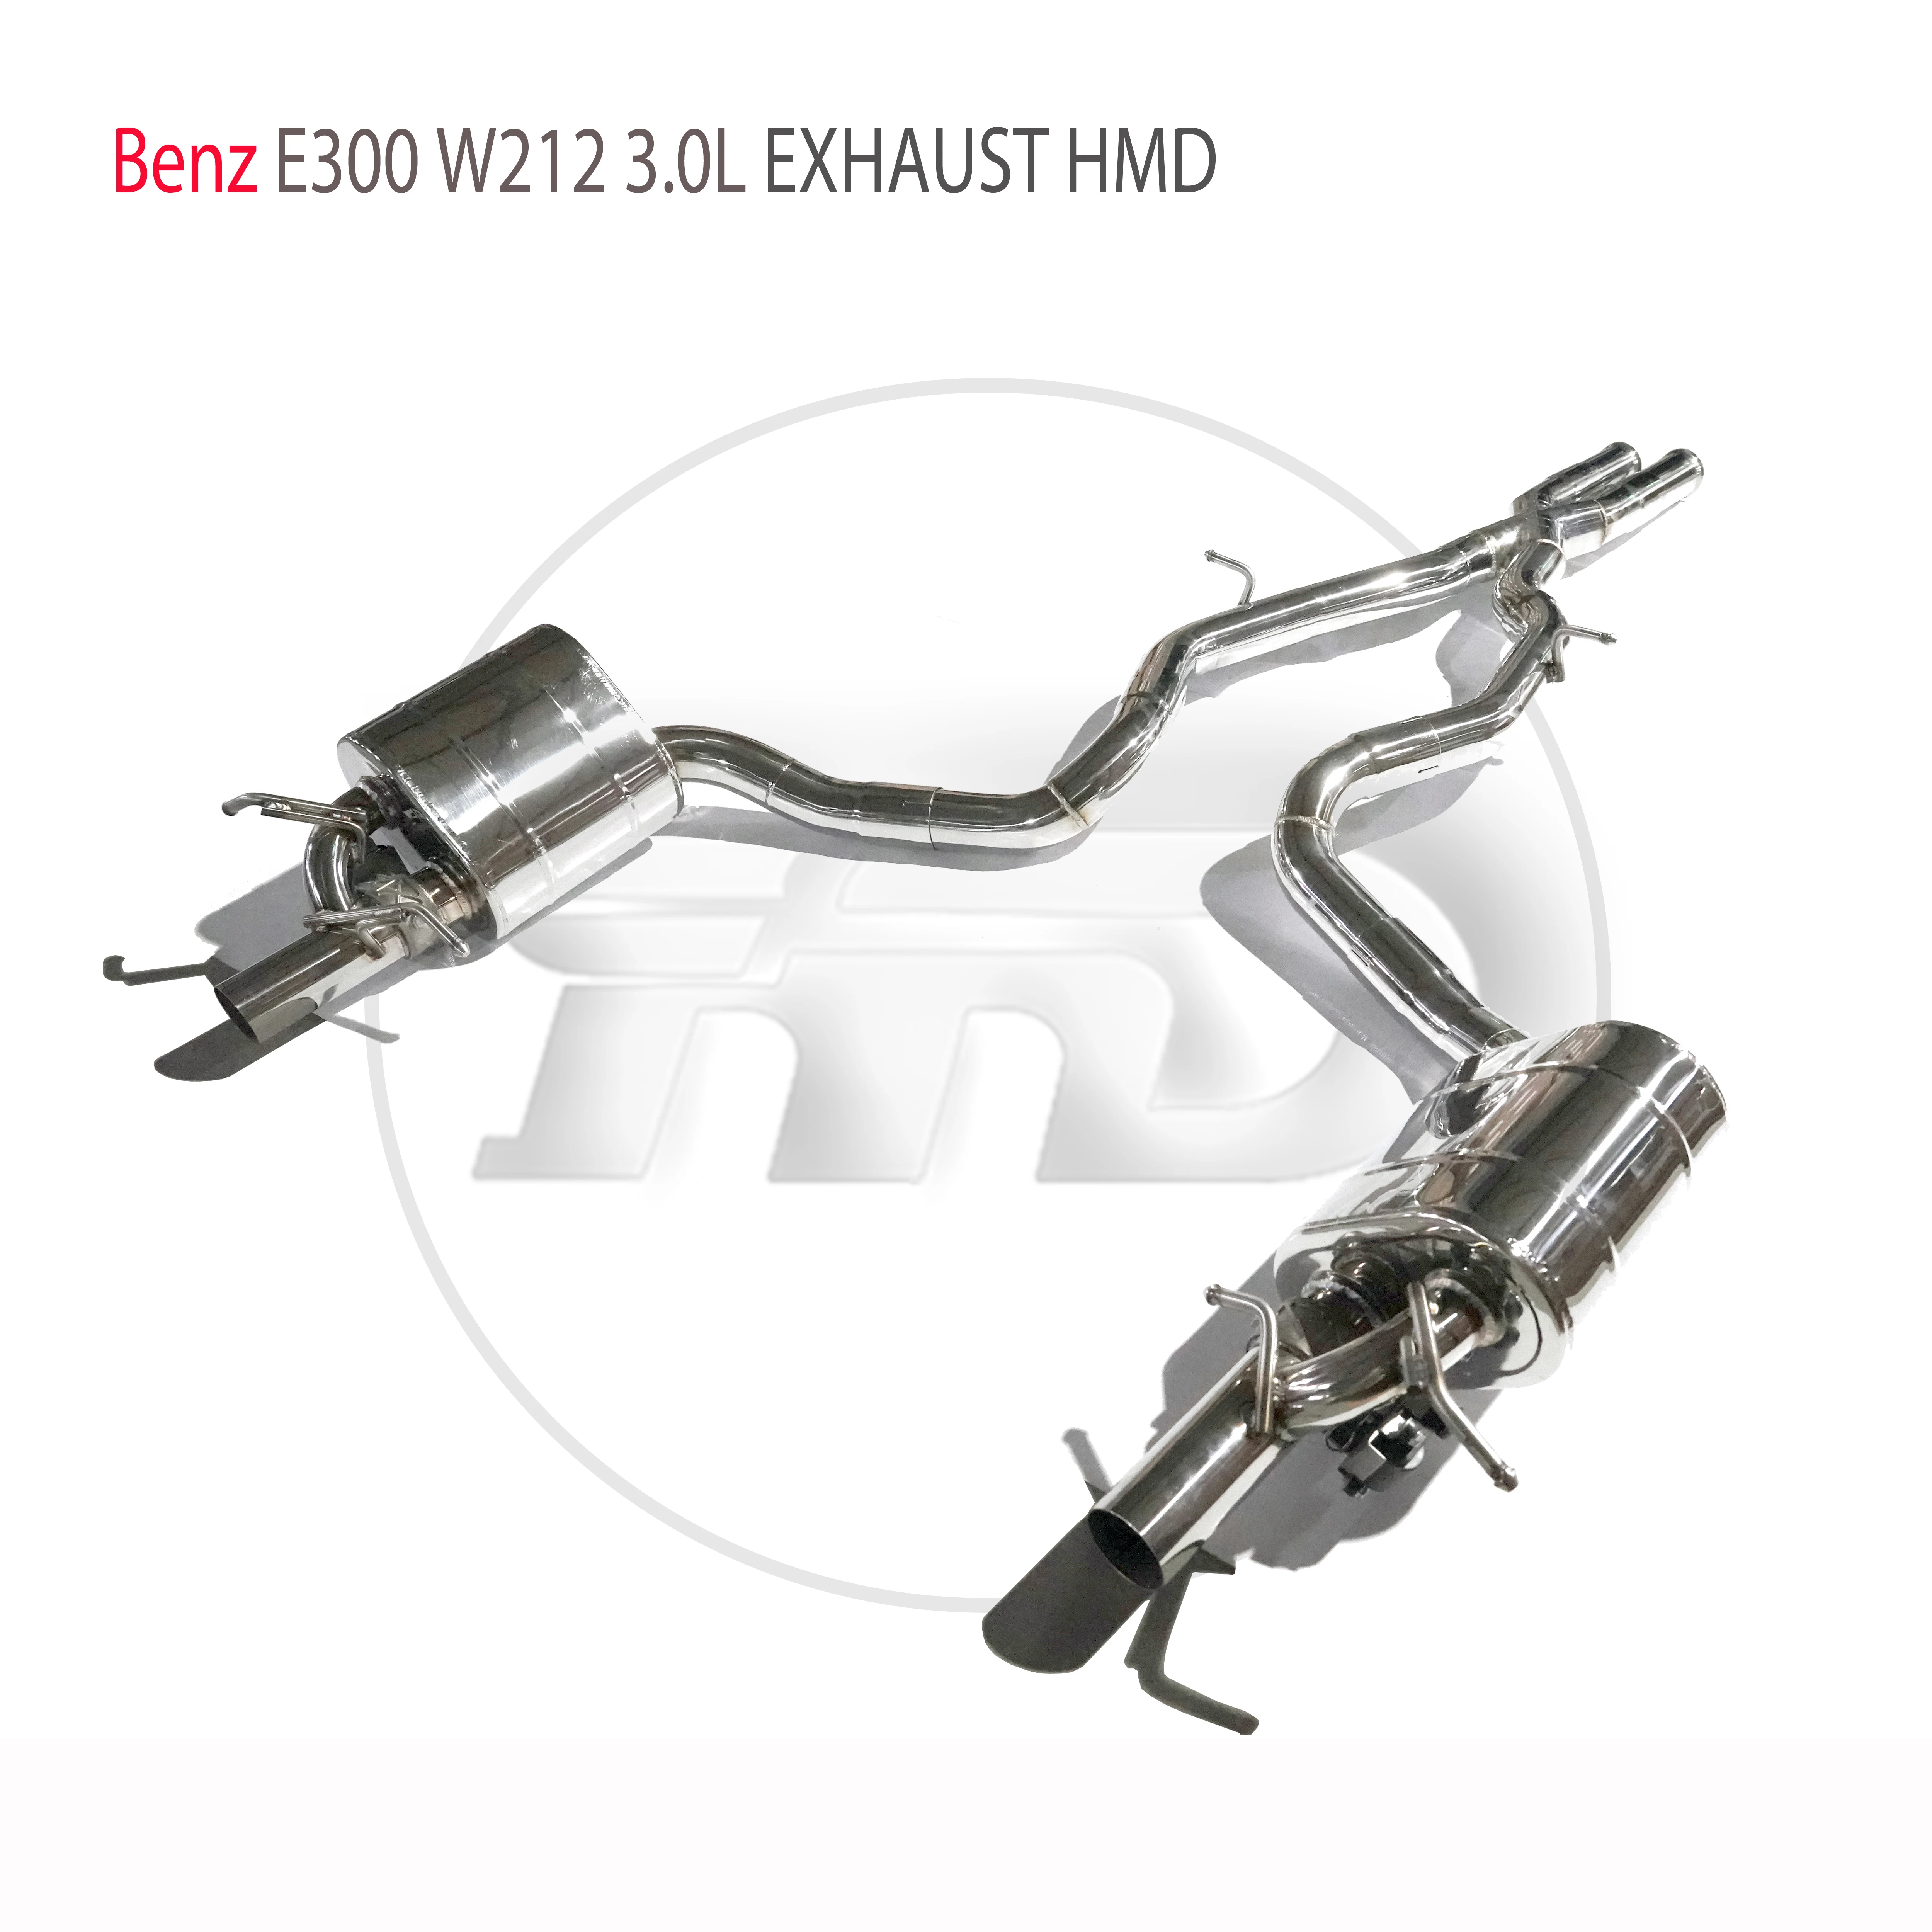 

HMD Stainless Steel Exhaust System Performance Catback For Mercedes Benz E300 W212 3.0L Car Muffler